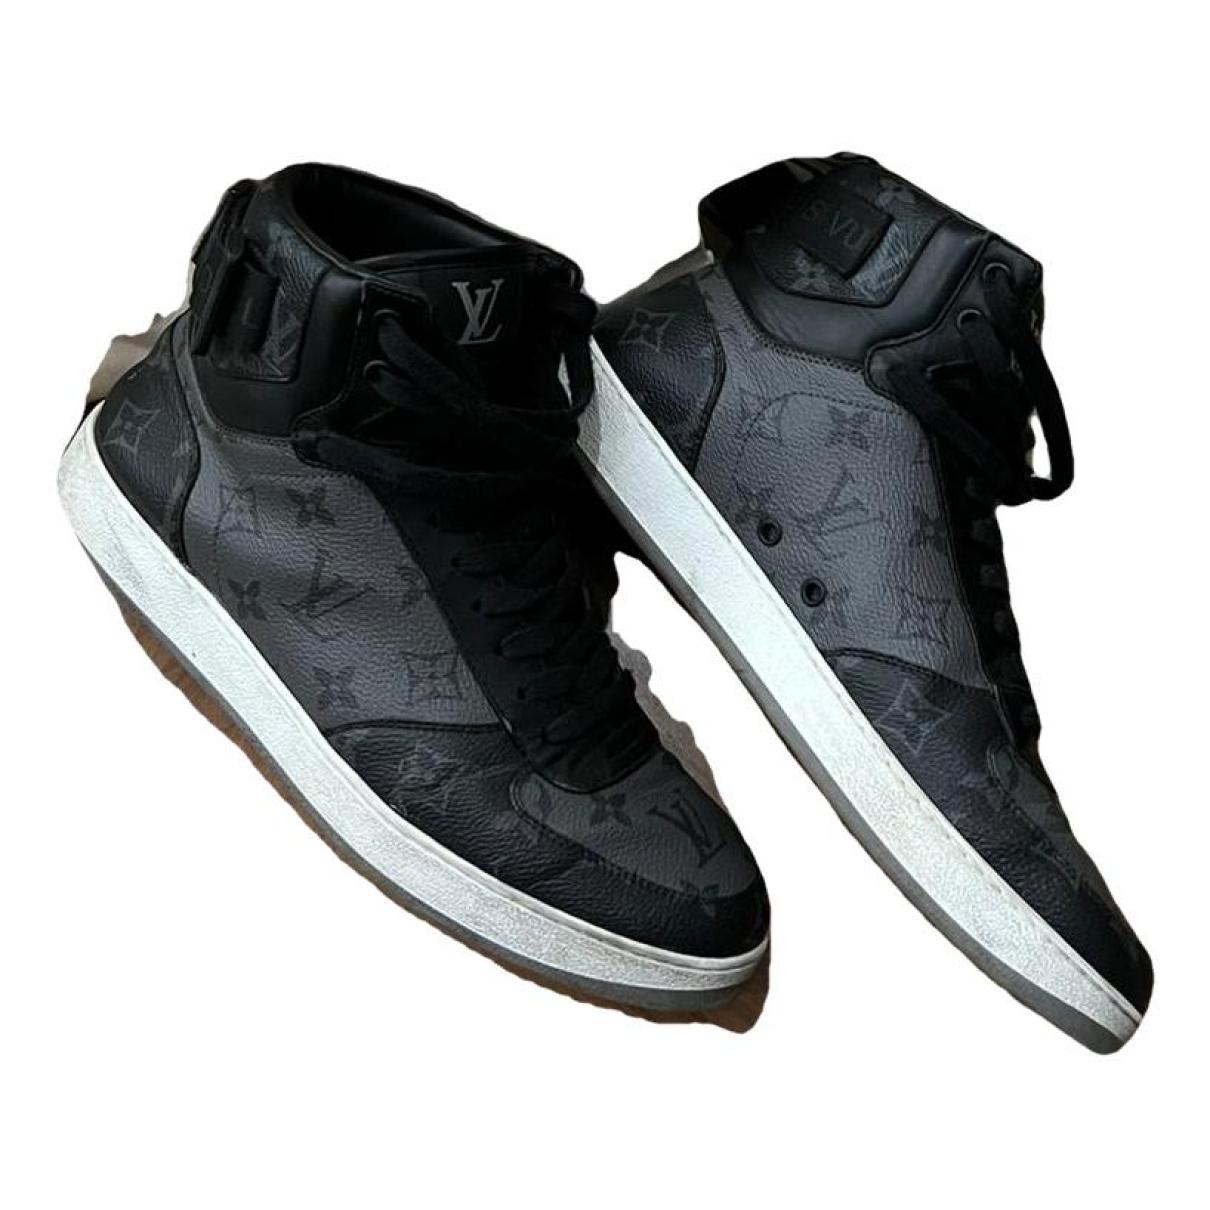 Lv trainer leather high trainers Louis Vuitton Black size 8 UK in Leather -  37234993